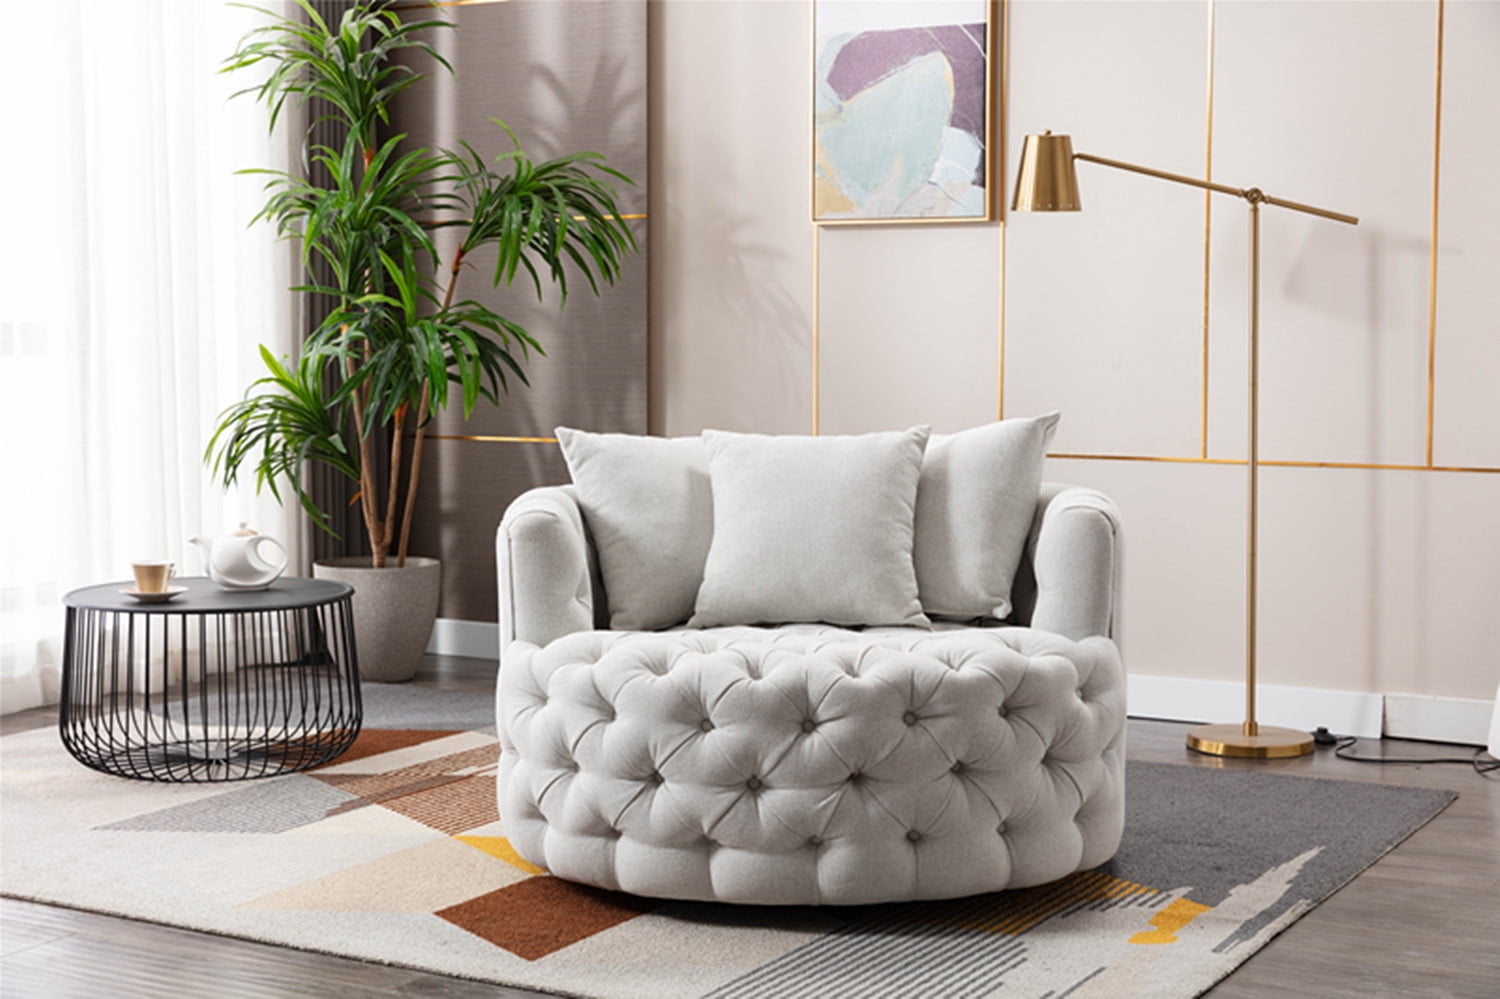 Details about   Rotating Collapsible Swivel Sofa Chair Foldable Comfortable Leather Floor Seat 